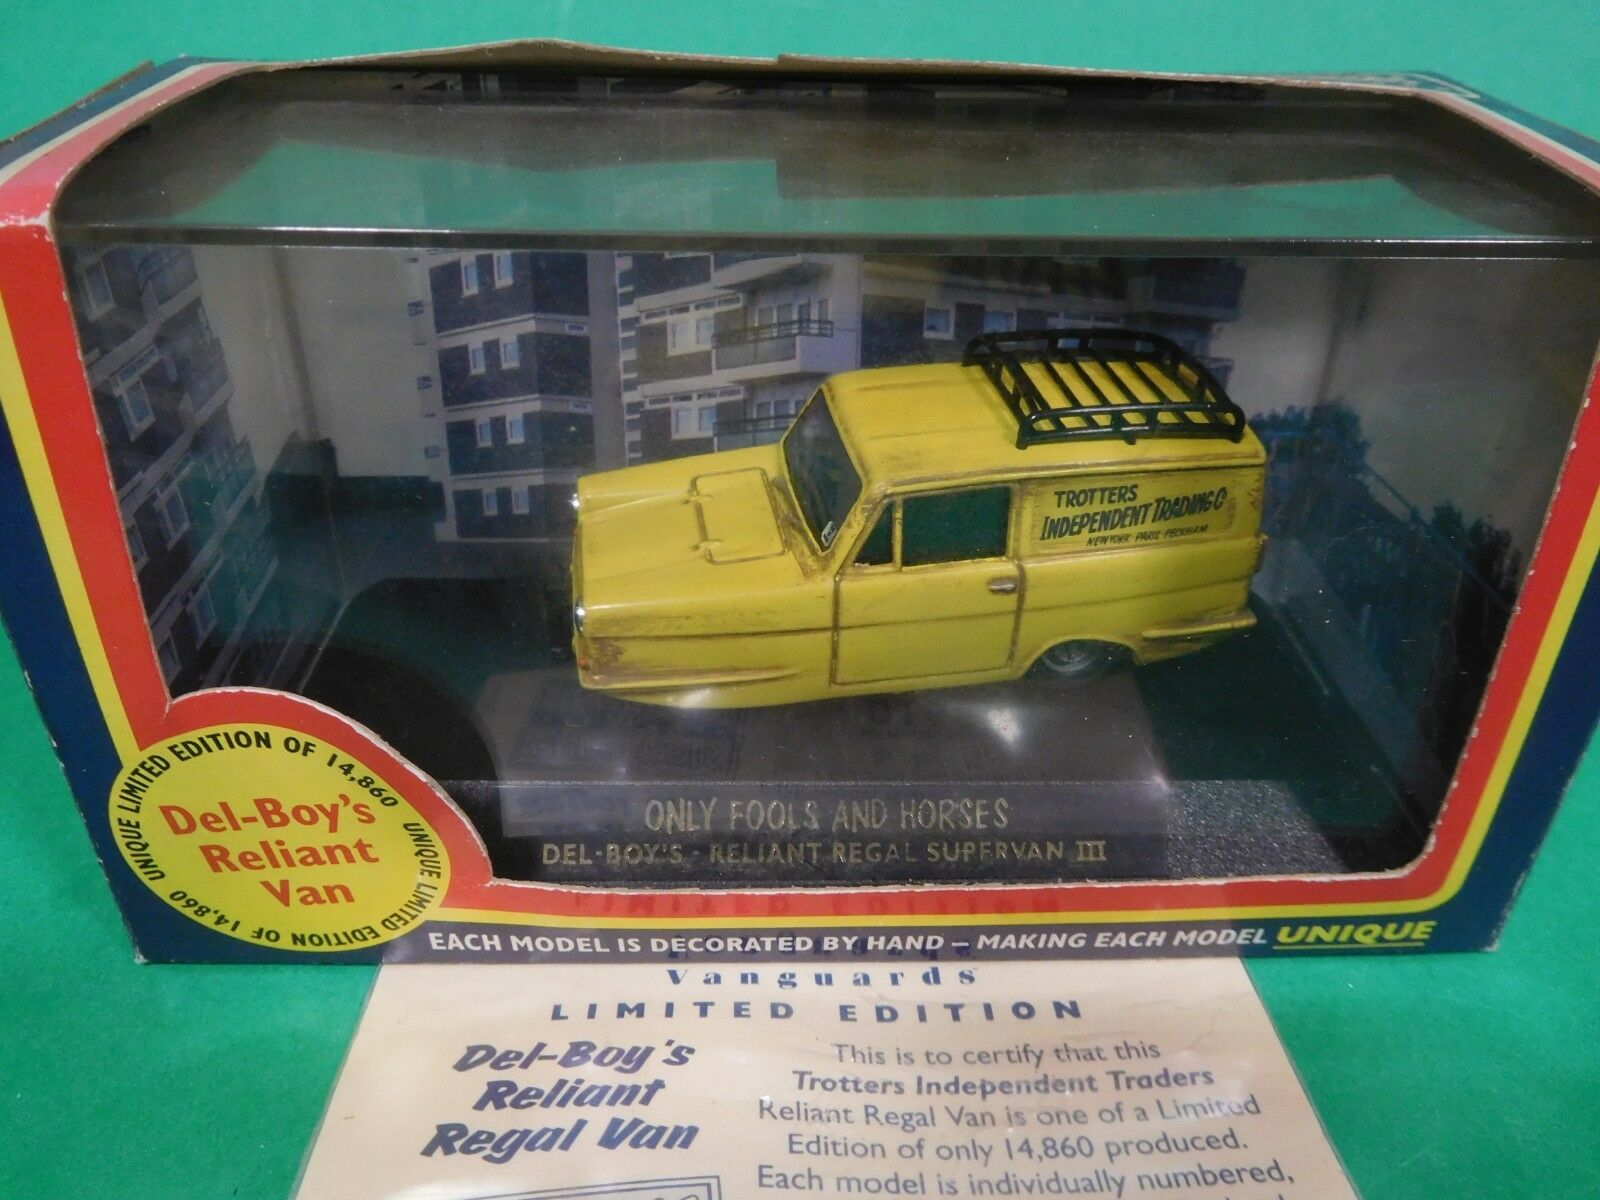 Only Fools And Horses Limited Edition Vanguard Hand - Scale Model , HD Wallpaper & Backgrounds